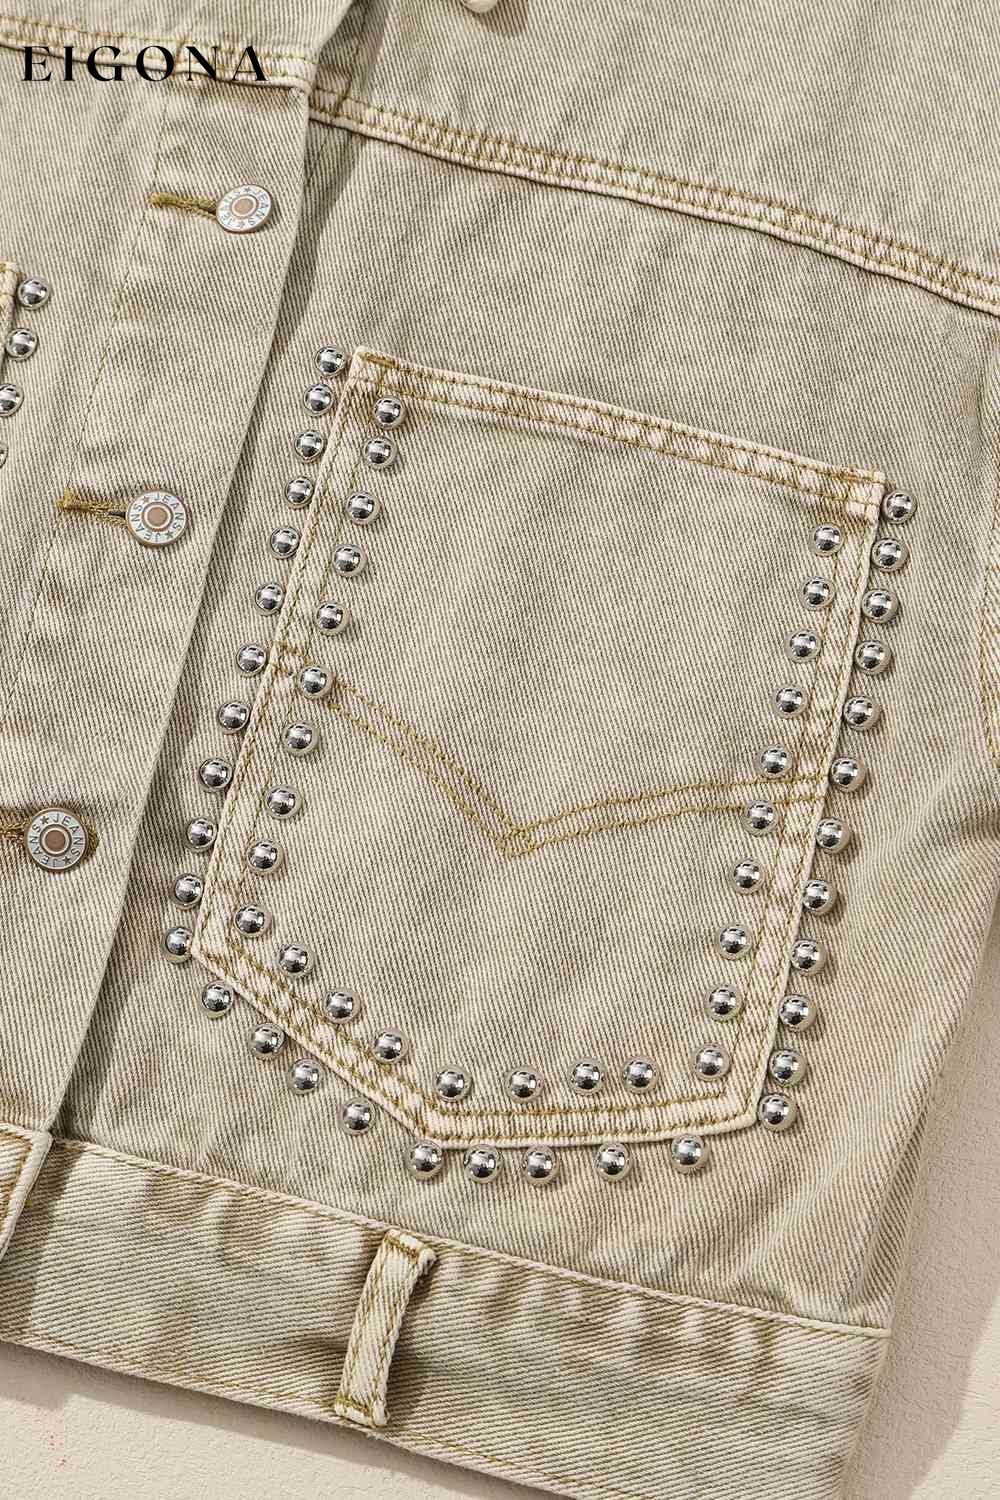 Studded Collared Neck Denim Jacket with Pockets clothes Jackets & Coats Ship From Overseas SYNZ